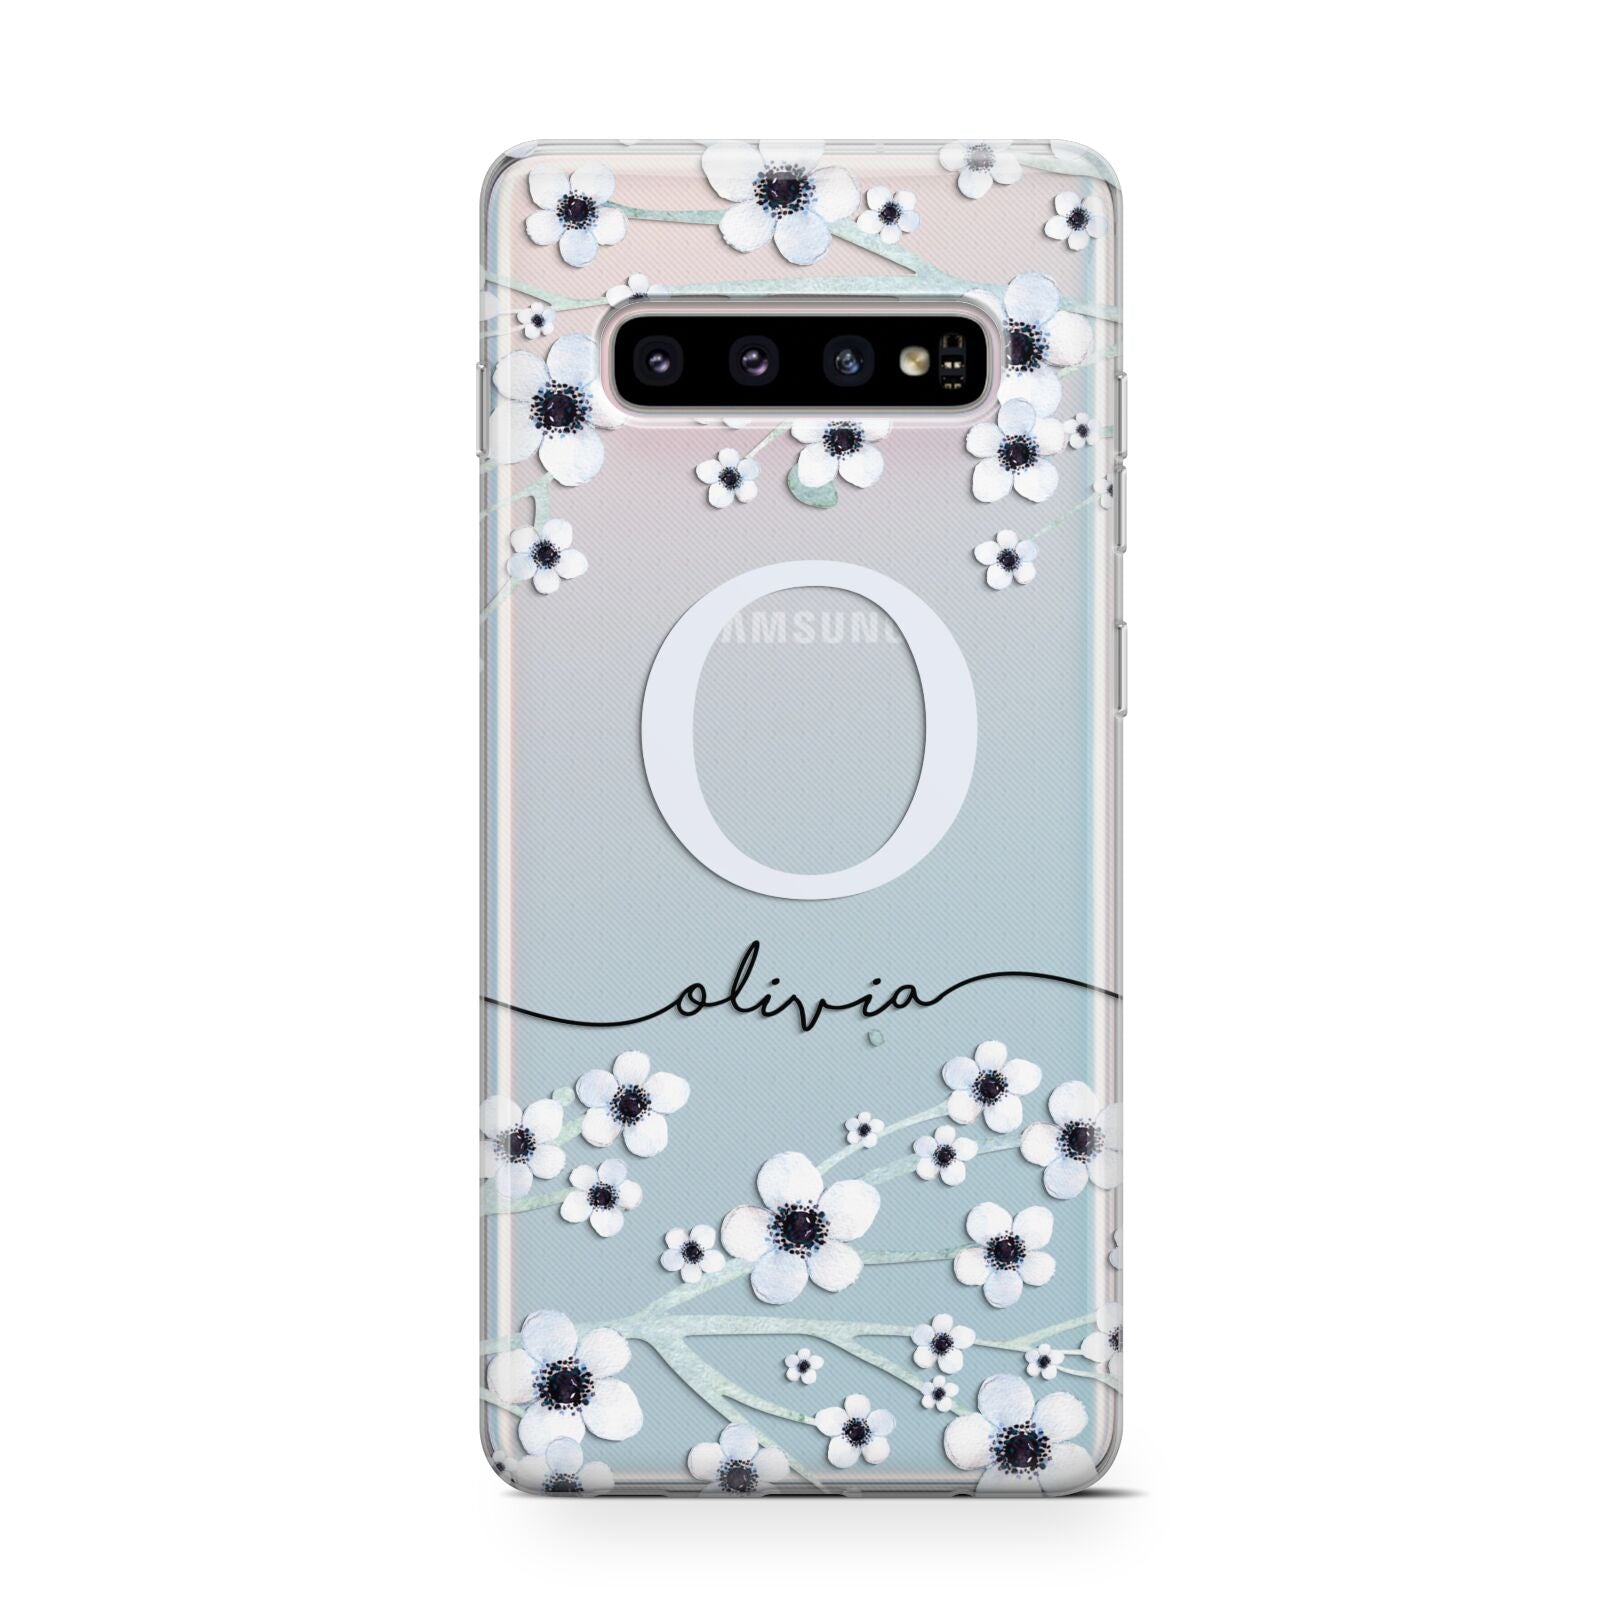 Personalised White Flower Protective Samsung Galaxy Case